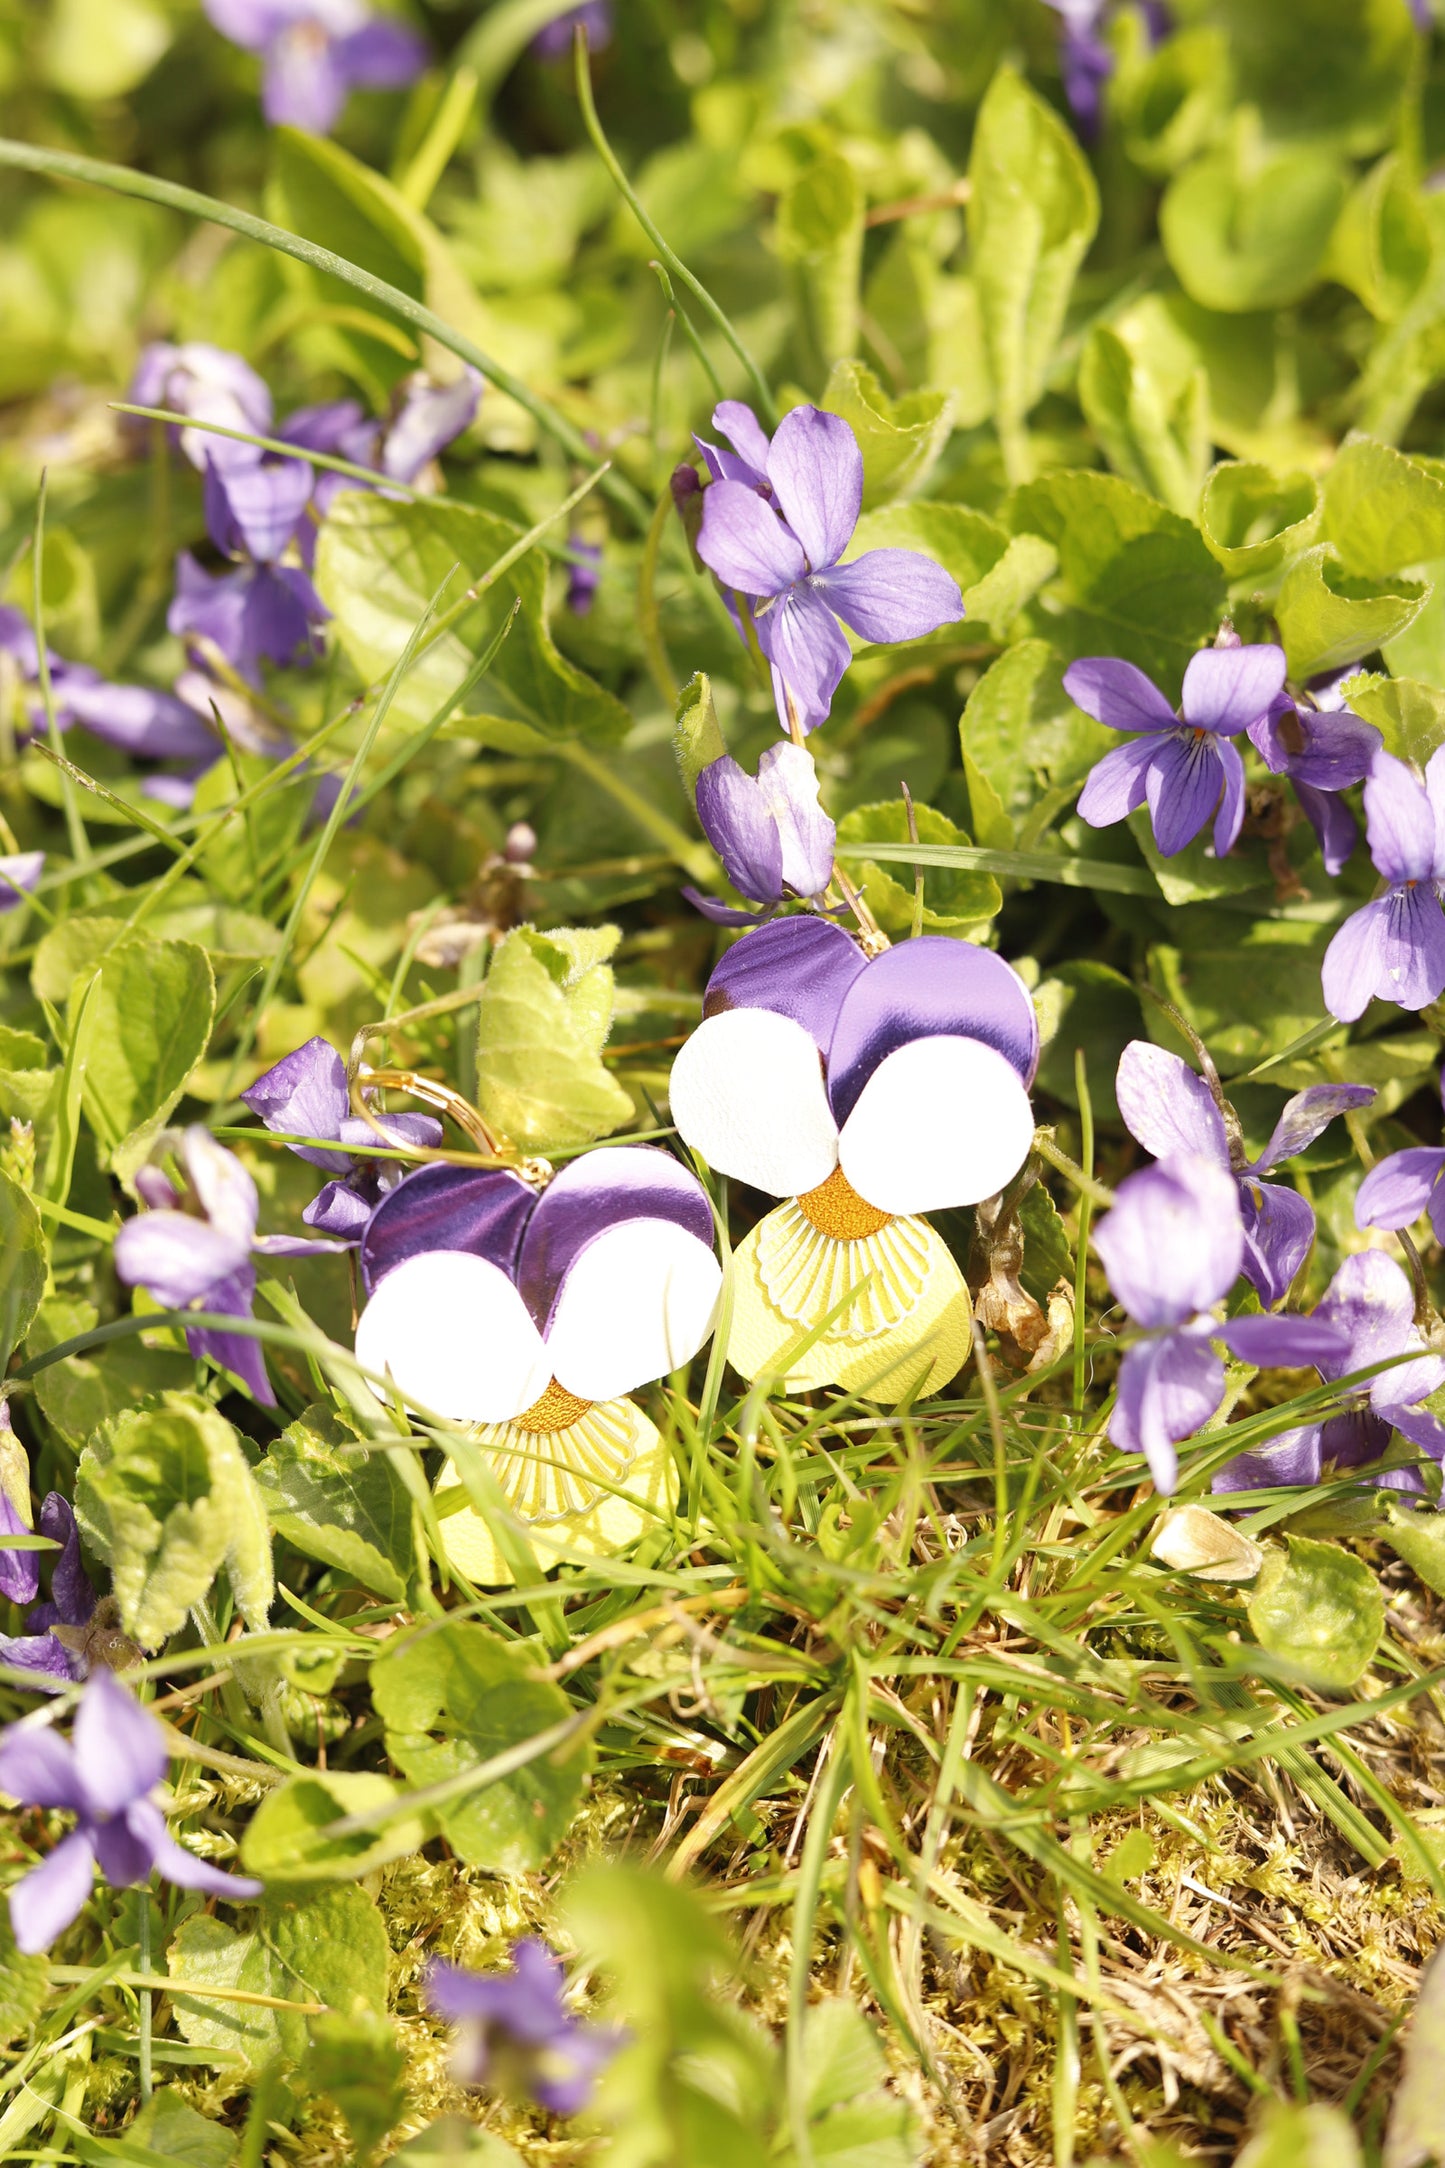 Pansies earrings - purple white and yellow